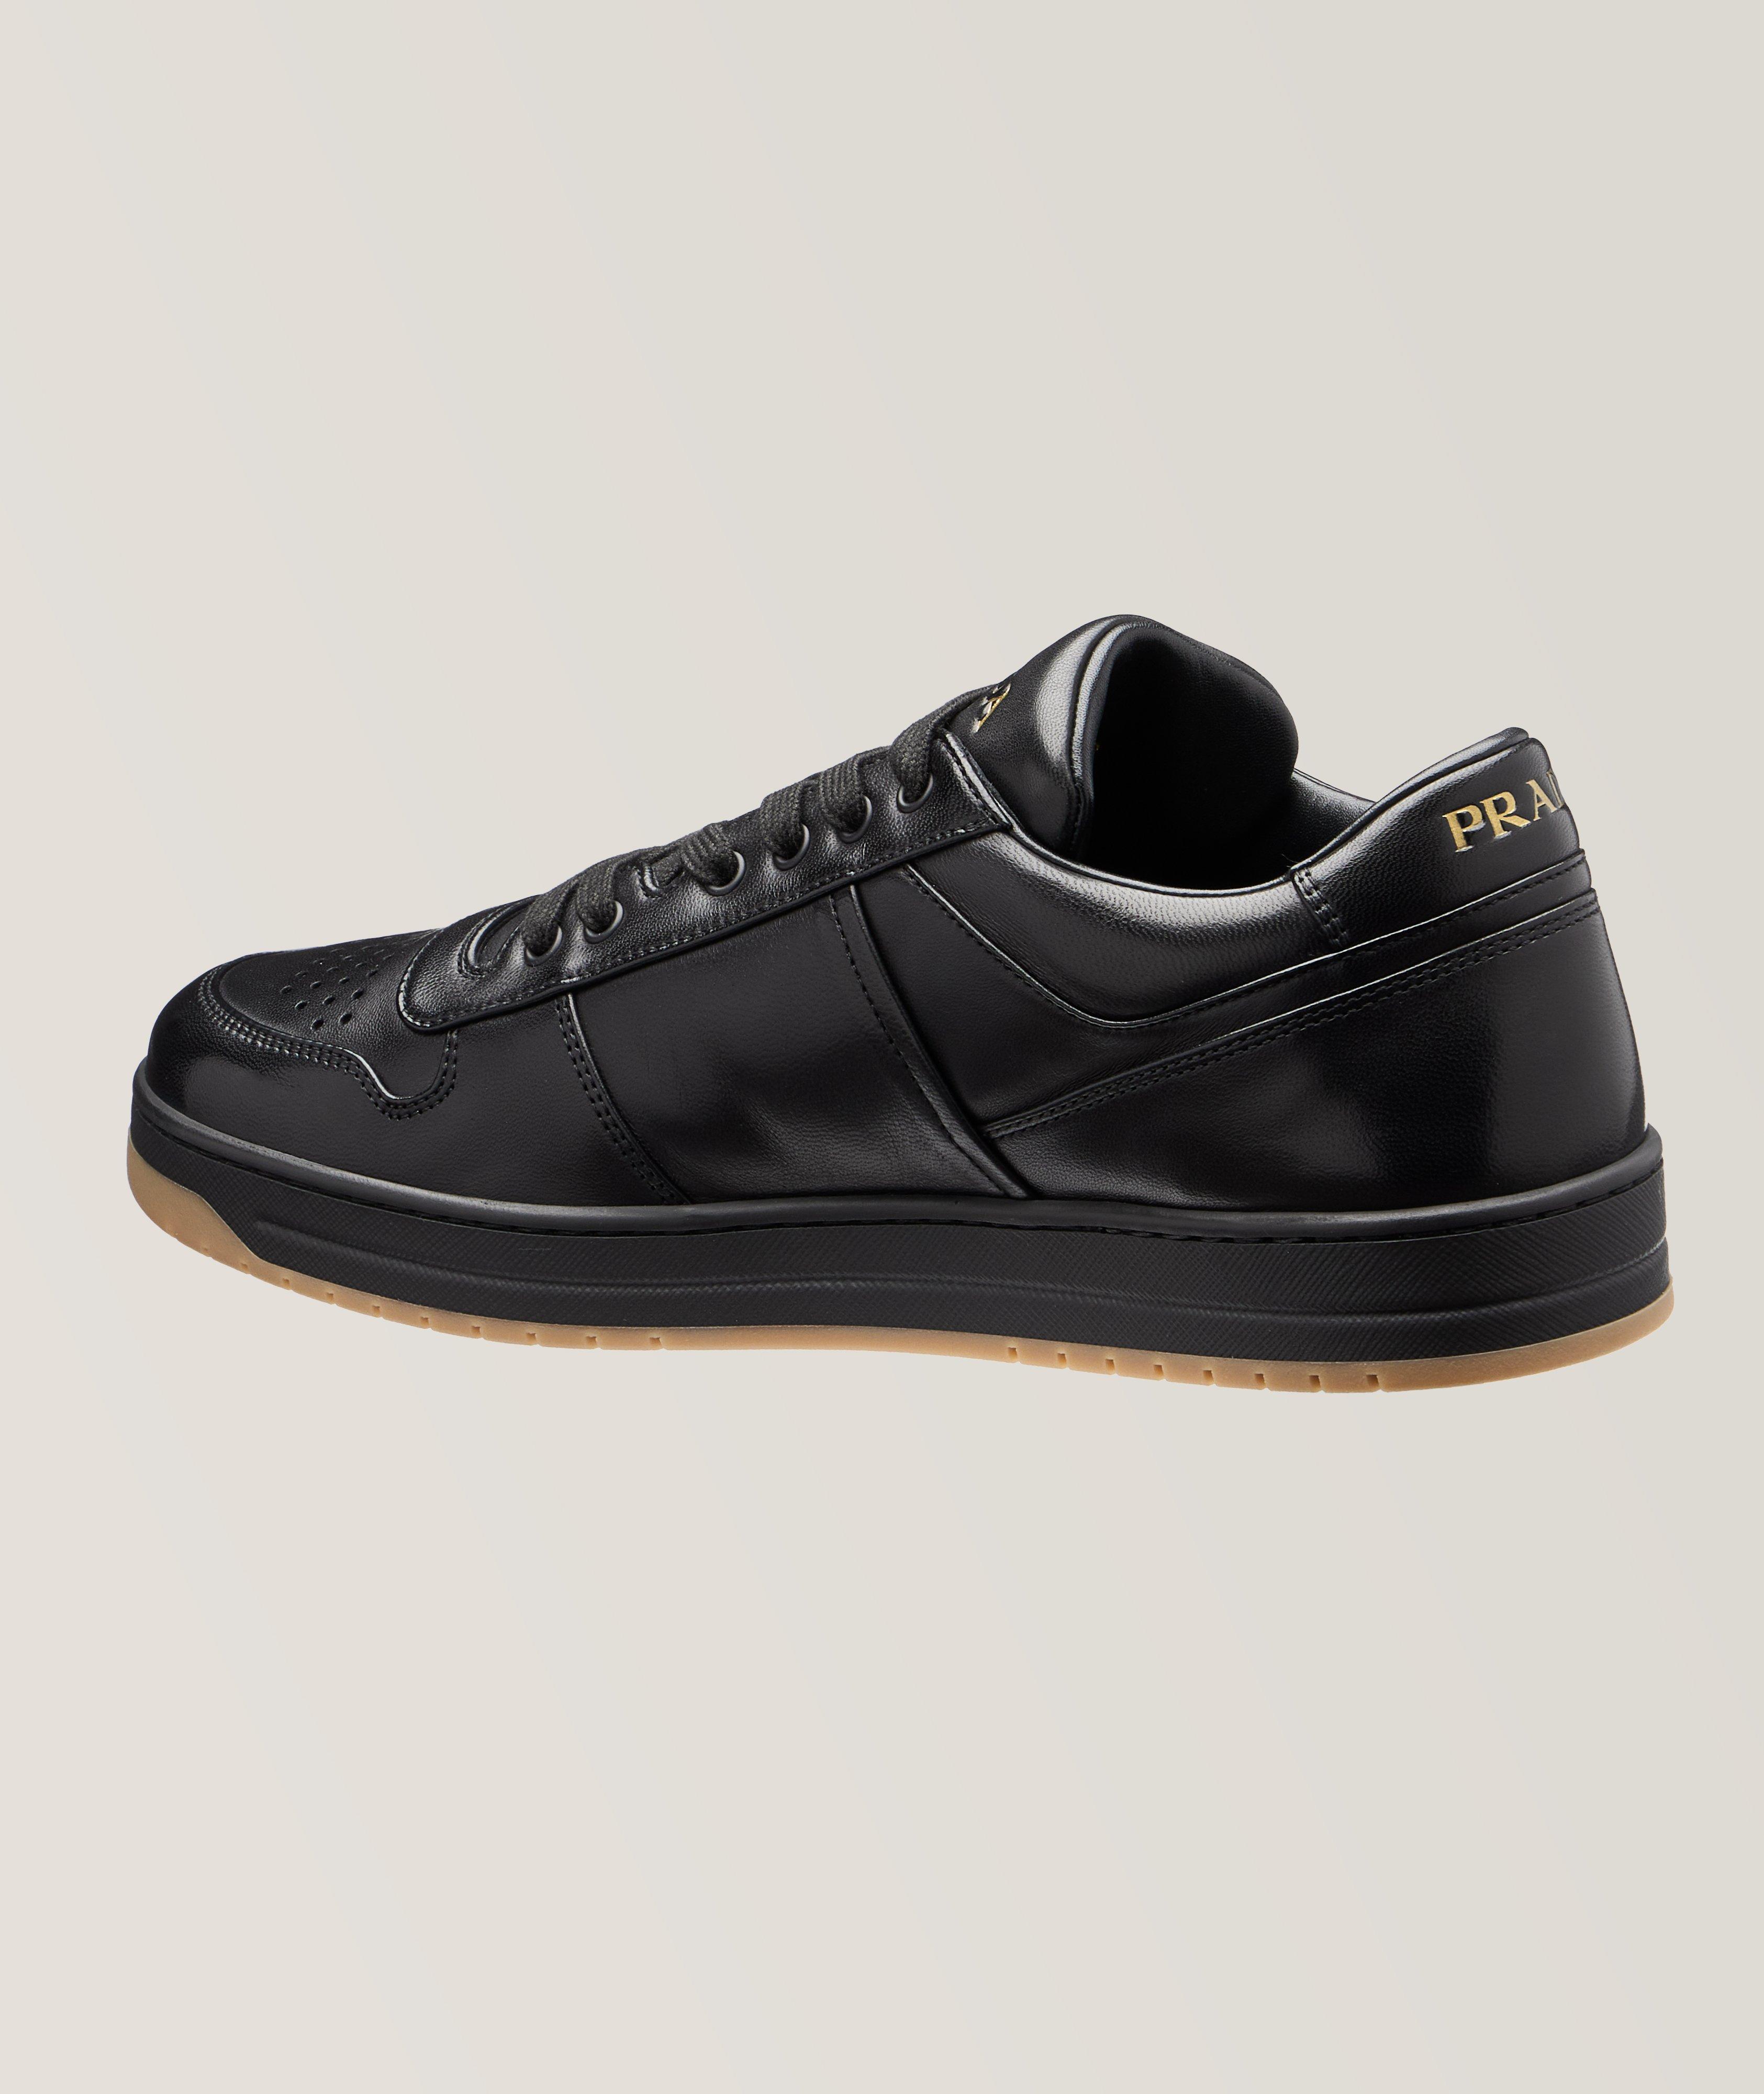 Downtown Nappa Leather Sneakers